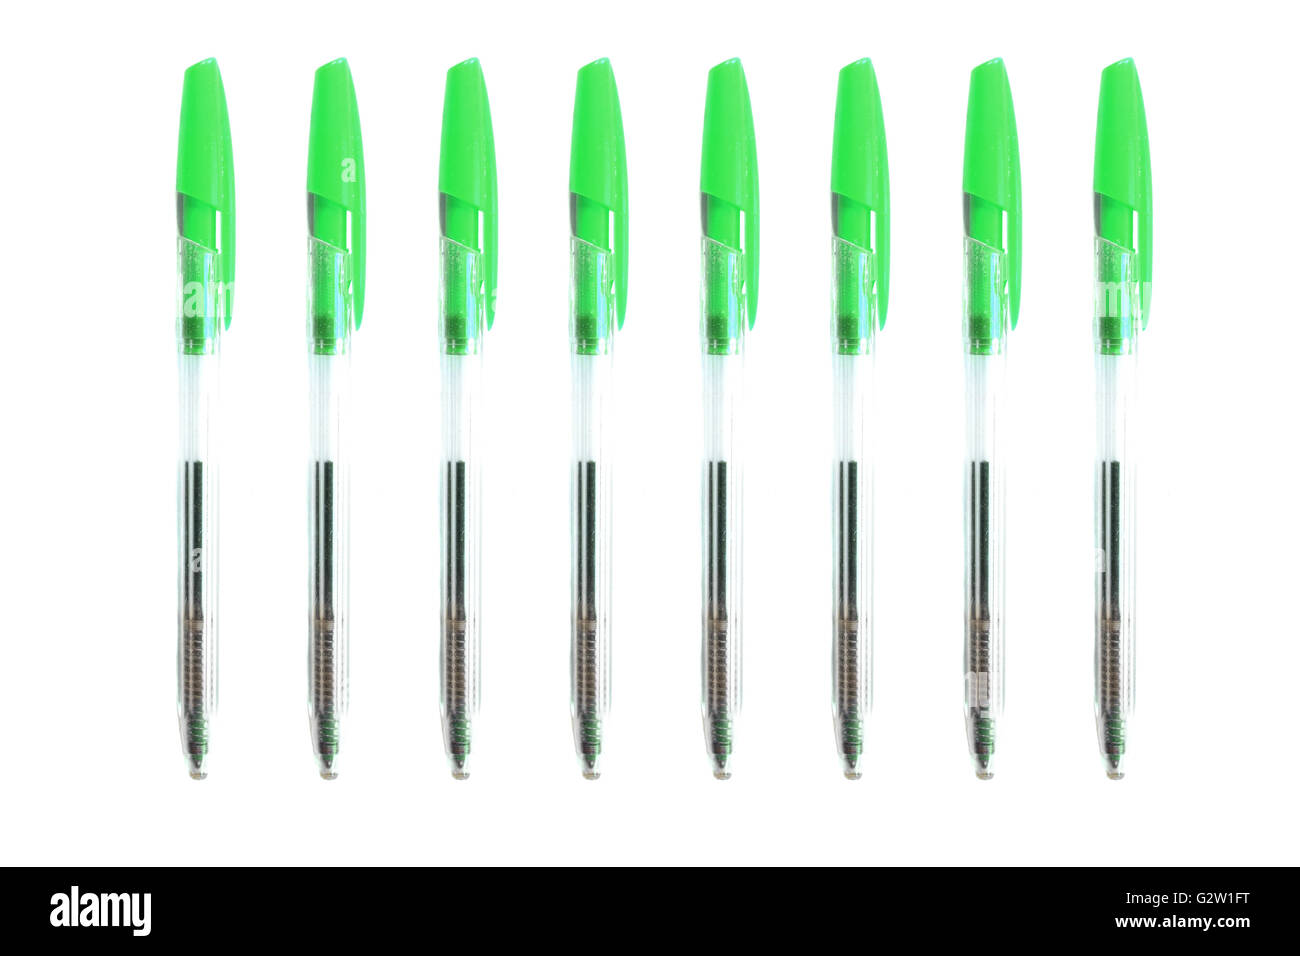 Green biro pens photographed against a white background. Stock Photo